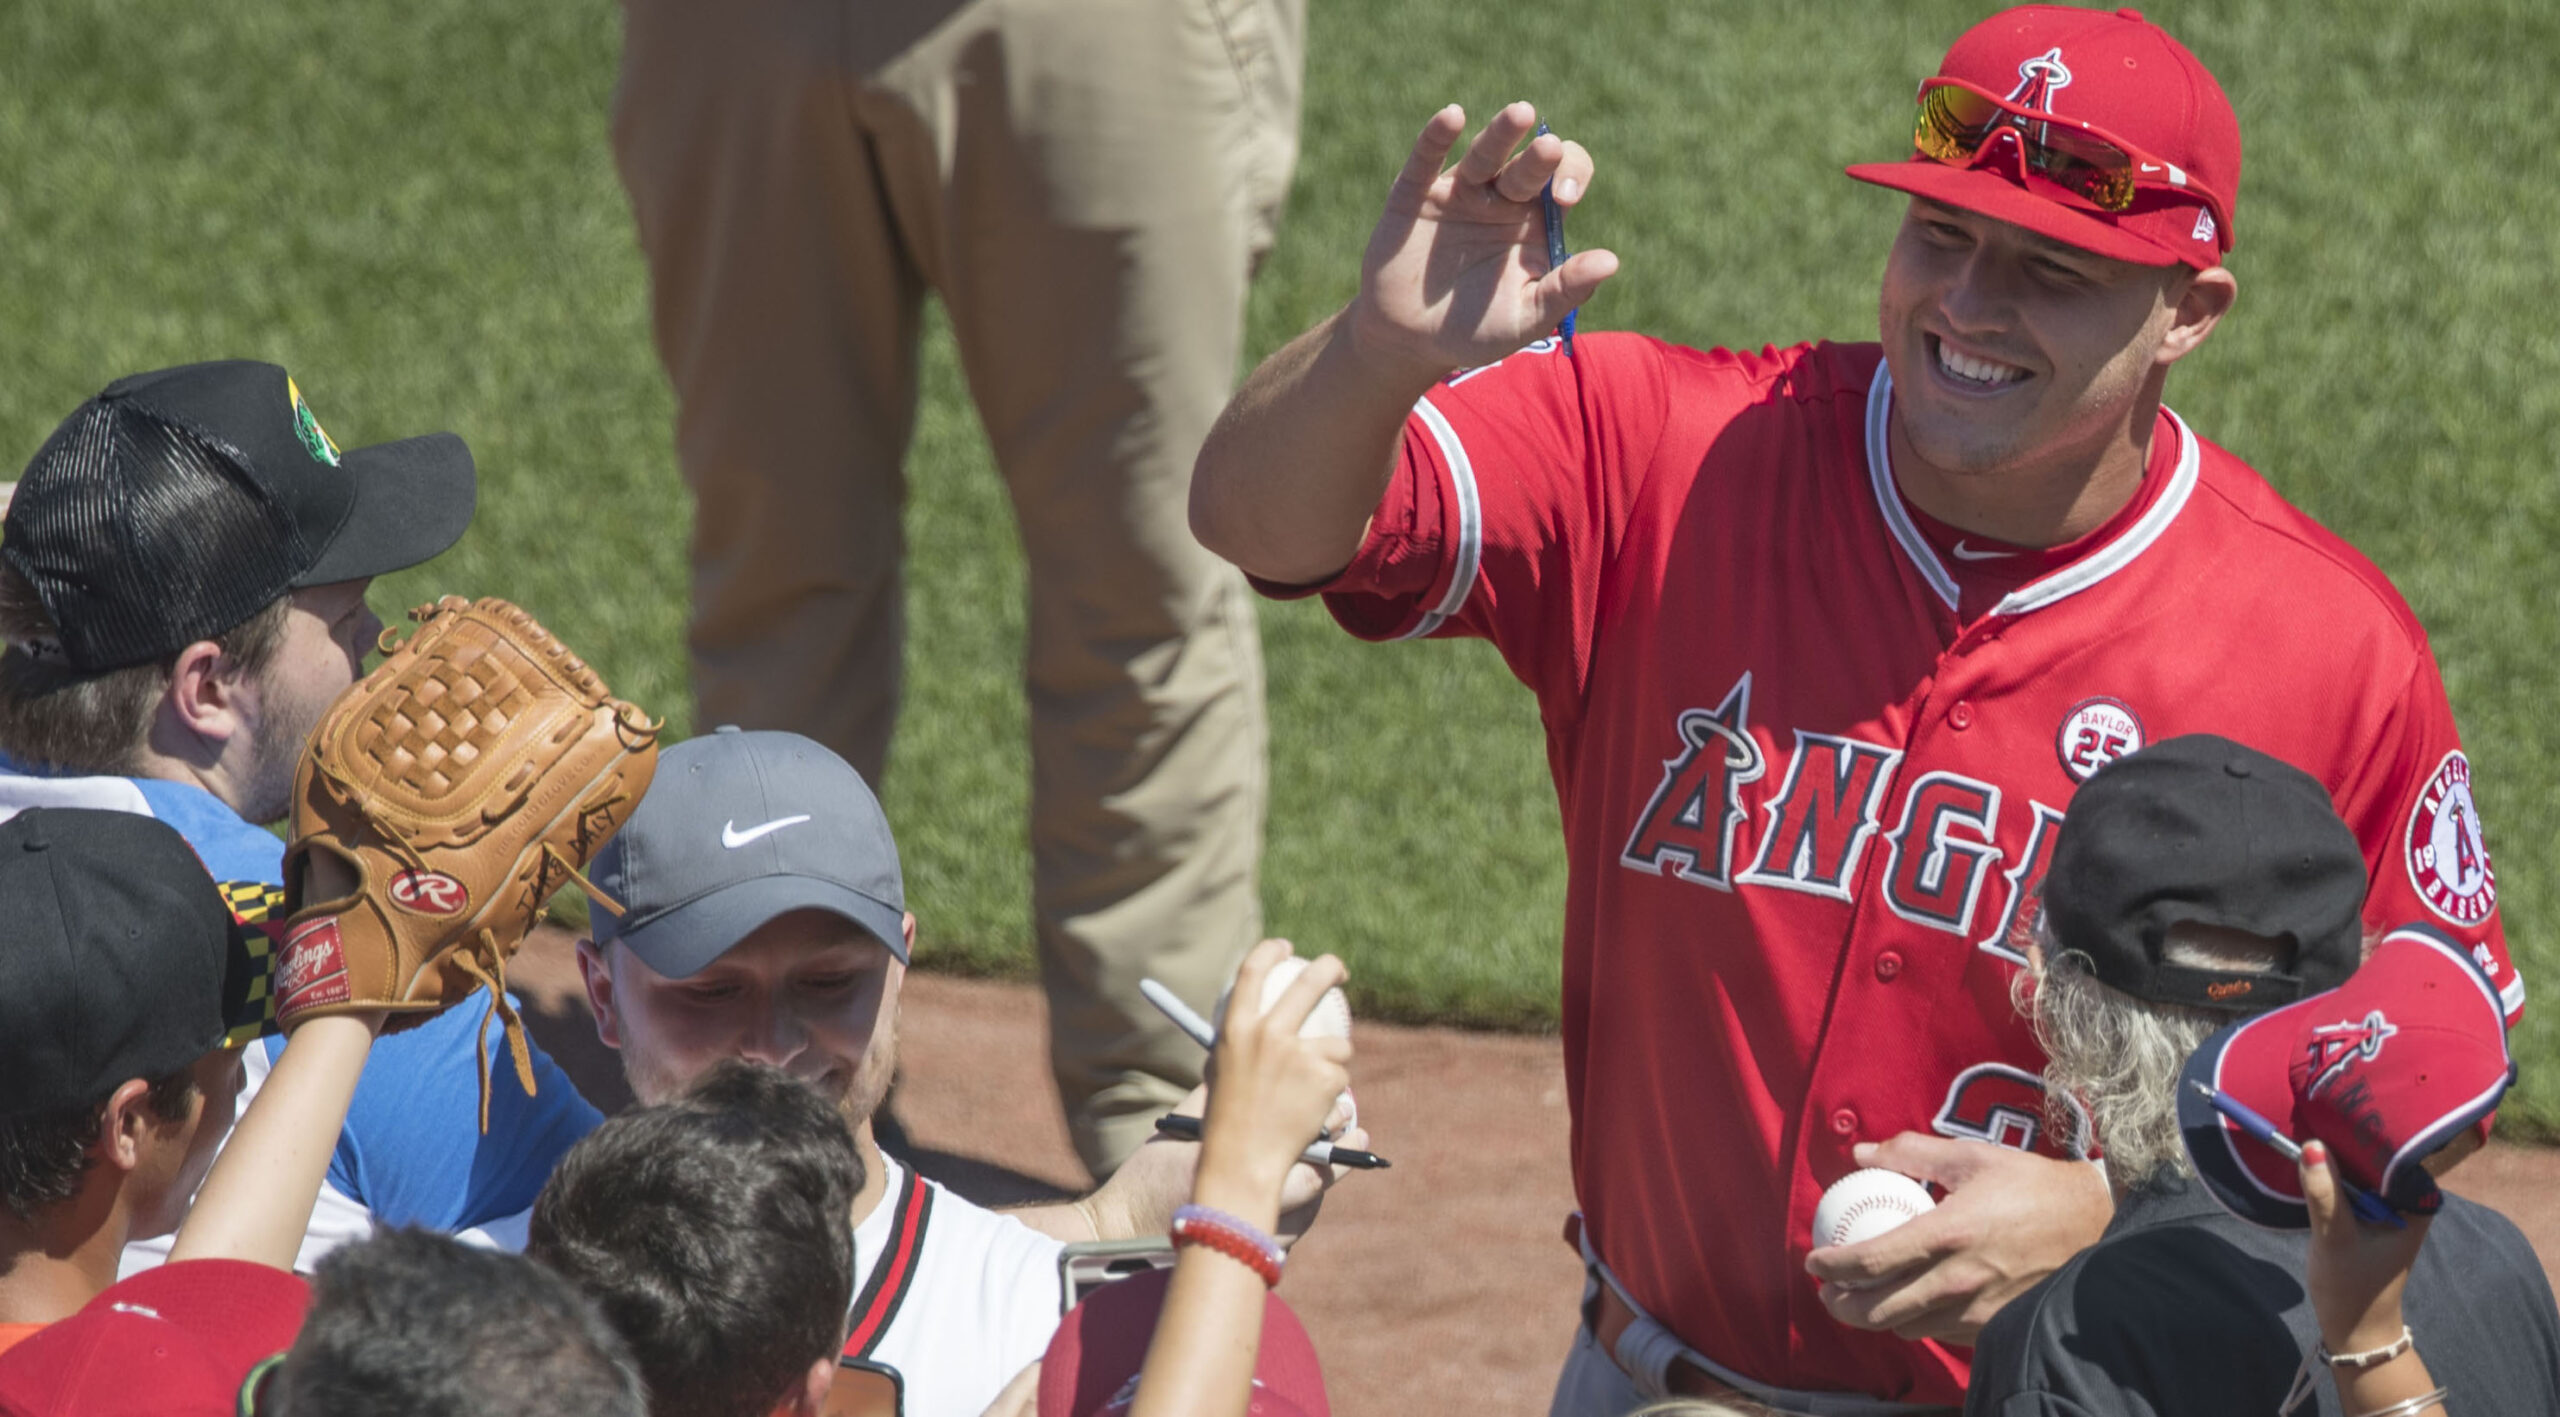 The best package for Mike Trout from every team - MLB Daily Dish